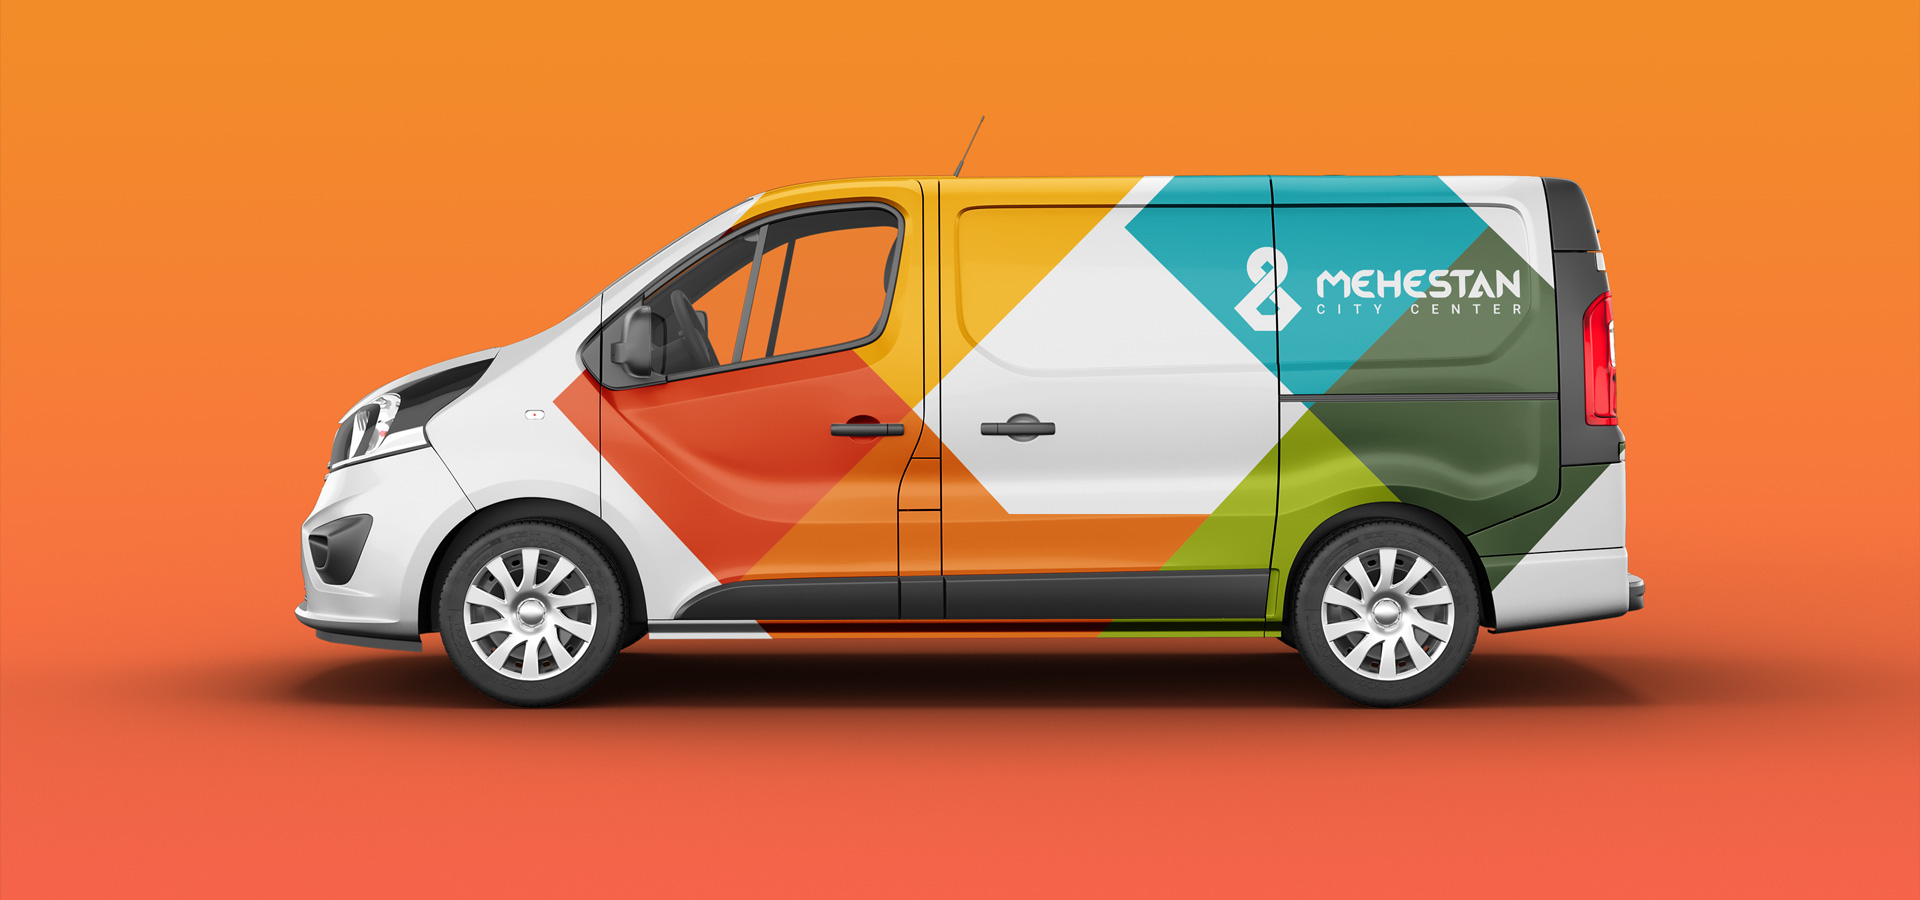 Car decal design for the mall branding of Mehestan by Zhahoo Creative Agency.